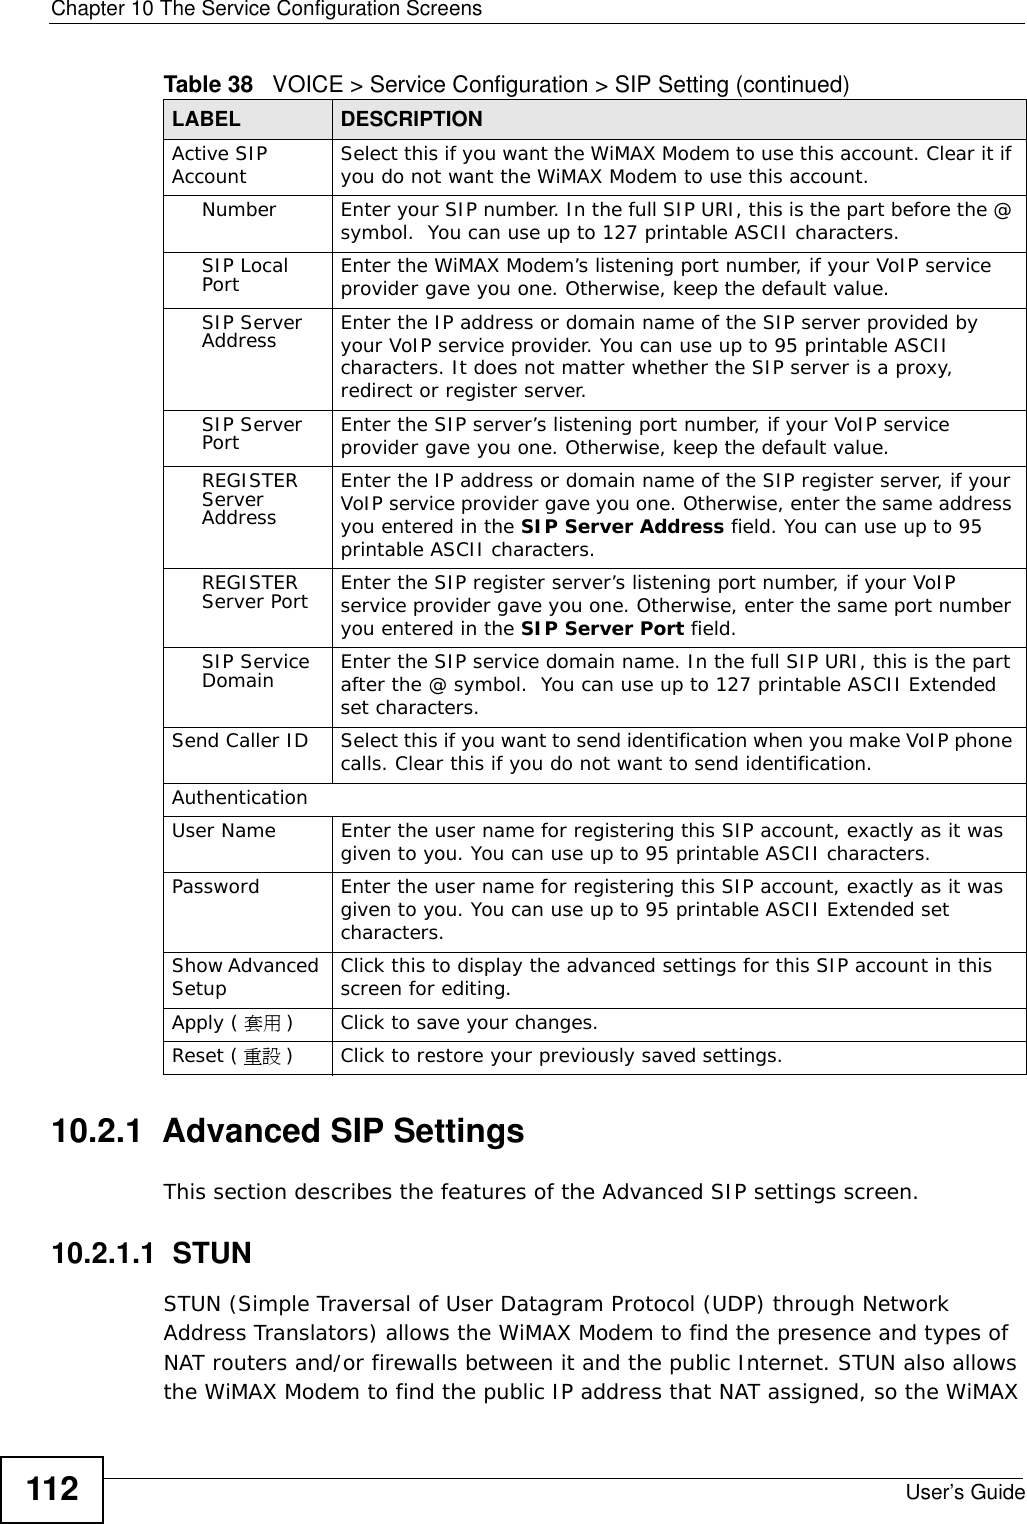 Chapter 10 The Service Configuration ScreensUser’s Guide11210.2.1  Advanced SIP SettingsThis section describes the features of the Advanced SIP settings screen.10.2.1.1  STUNSTUN (Simple Traversal of User Datagram Protocol (UDP) through Network Address Translators) allows the WiMAX Modem to find the presence and types of NAT routers and/or firewalls between it and the public Internet. STUN also allows the WiMAX Modem to find the public IP address that NAT assigned, so the WiMAX Active SIP Account Select this if you want the WiMAX Modem to use this account. Clear it if you do not want the WiMAX Modem to use this account.Number Enter your SIP number. In the full SIP URI, this is the part before the @ symbol.  You can use up to 127 printable ASCII characters.SIP Local Port Enter the WiMAX Modem’s listening port number, if your VoIP service provider gave you one. Otherwise, keep the default value.SIP Server Address Enter the IP address or domain name of the SIP server provided by your VoIP service provider. You can use up to 95 printable ASCII characters. It does not matter whether the SIP server is a proxy, redirect or register server.SIP Server Port Enter the SIP server’s listening port number, if your VoIP service provider gave you one. Otherwise, keep the default value.REGISTER Server AddressEnter the IP address or domain name of the SIP register server, if your VoIP service provider gave you one. Otherwise, enter the same address you entered in the SIP Server Address field. You can use up to 95 printable ASCII characters.REGISTER Server Port Enter the SIP register server’s listening port number, if your VoIP service provider gave you one. Otherwise, enter the same port number you entered in the SIP Server Port field.SIP Service Domain Enter the SIP service domain name. In the full SIP URI, this is the part after the @ symbol.  You can use up to 127 printable ASCII Extended set characters.Send Caller ID Select this if you want to send identification when you make VoIP phone calls. Clear this if you do not want to send identification.AuthenticationUser Name Enter the user name for registering this SIP account, exactly as it was given to you. You can use up to 95 printable ASCII characters.Password Enter the user name for registering this SIP account, exactly as it was given to you. You can use up to 95 printable ASCII Extended set characters.Show Advanced Setup Click this to display the advanced settings for this SIP account in this screen for editing.Apply ( 套用 )Click to save your changes.Reset ( 重設 )Click to restore your previously saved settings.Table 38   VOICE &gt; Service Configuration &gt; SIP Setting (continued)LABEL DESCRIPTION